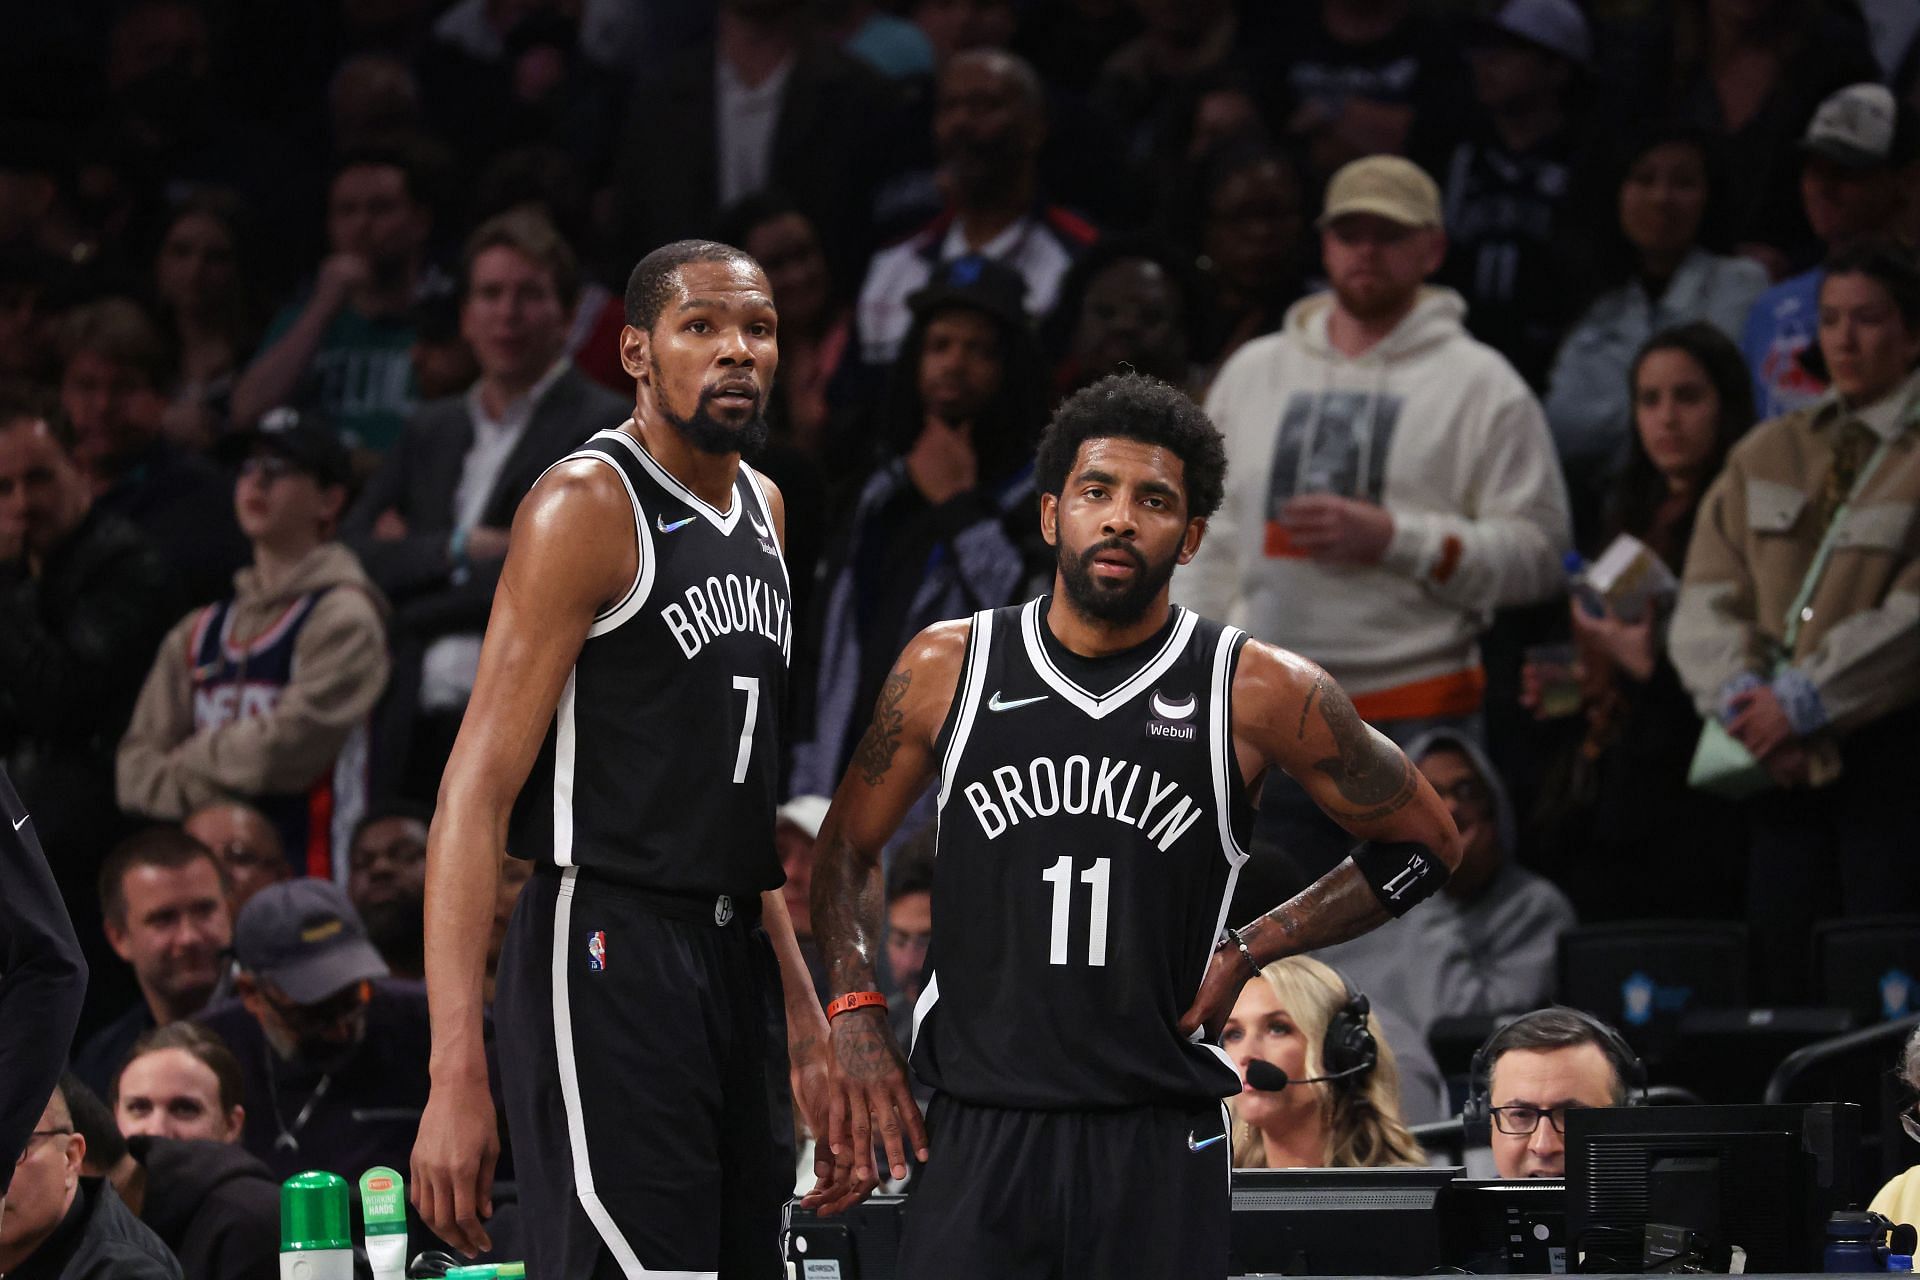 Kevin Durant and Kyrie Irving of the Brooklyn Nets.